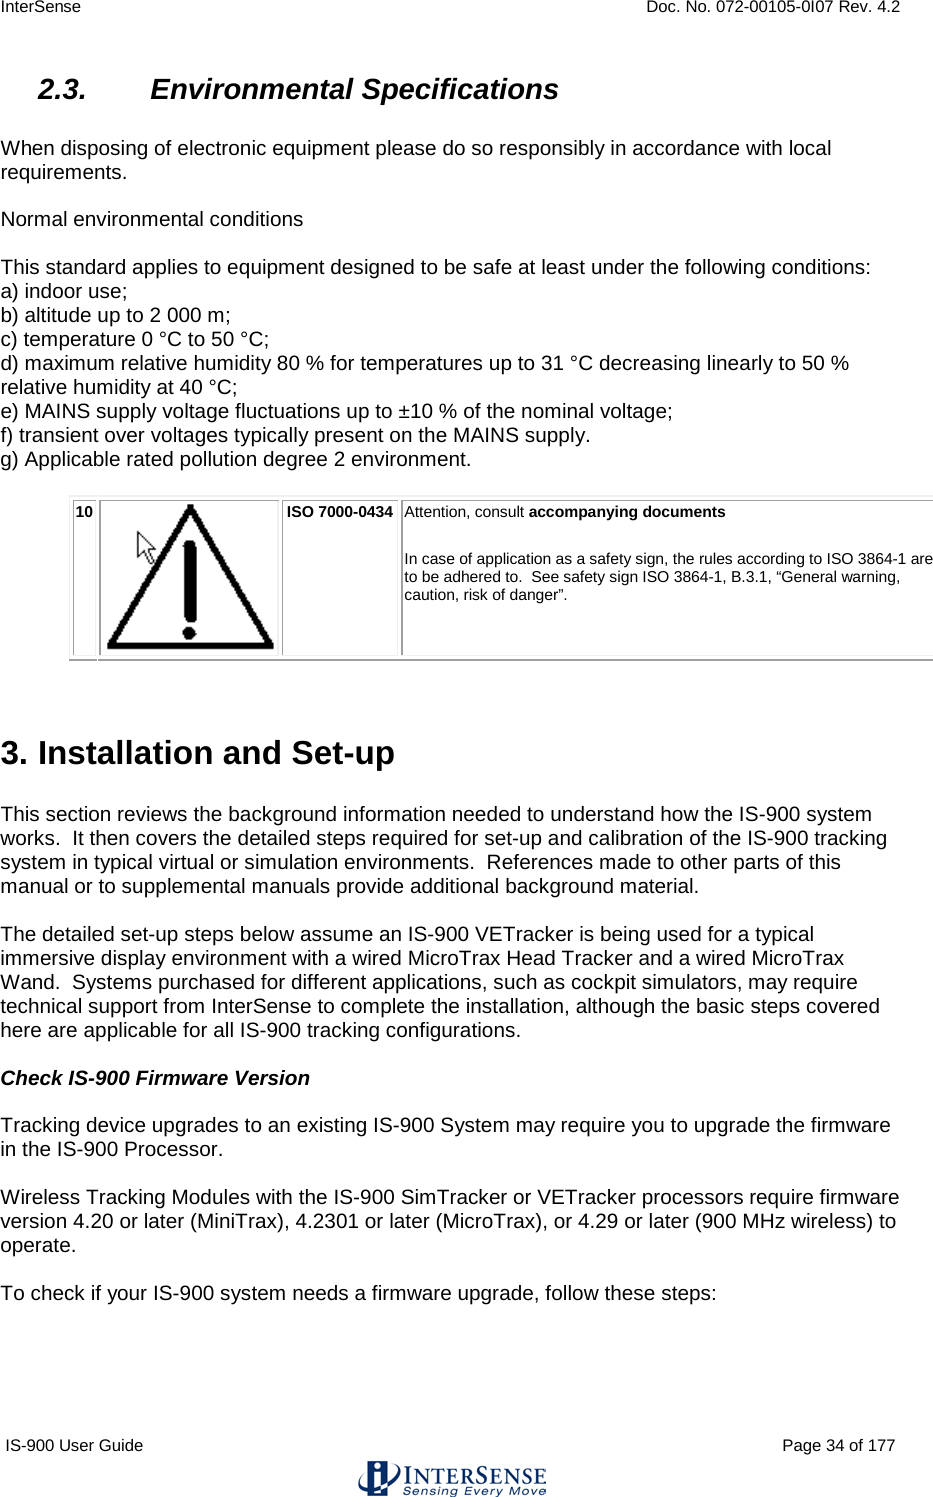 InterSense    Doc. No. 072-00105-0I07 Rev. 4.2 IS-900 User Guide                                                                                                                                          Page 34 of 177  2.3. Environmental Specifications  When disposing of electronic equipment please do so responsibly in accordance with local requirements.   Normal environmental conditions   This standard applies to equipment designed to be safe at least under the following conditions:  a) indoor use;  b) altitude up to 2 000 m;  c) temperature 0 °C to 50 °C;  d) maximum relative humidity 80 % for temperatures up to 31 °C decreasing linearly to 50 %  relative humidity at 40 °C;  e) MAINS supply voltage fluctuations up to ±10 % of the nominal voltage;  f) transient over voltages typically present on the MAINS supply.  g) Applicable rated pollution degree 2 environment.   10  ISO 7000-0434 Attention, consult accompanying documents  In case of application as a safety sign, the rules according to ISO 3864-1 are to be adhered to.  See safety sign ISO 3864-1, B.3.1, “General warning, caution, risk of danger”.   3. Installation and Set-up  This section reviews the background information needed to understand how the IS-900 system works.  It then covers the detailed steps required for set-up and calibration of the IS-900 tracking system in typical virtual or simulation environments.  References made to other parts of this manual or to supplemental manuals provide additional background material.    The detailed set-up steps below assume an IS-900 VETracker is being used for a typical immersive display environment with a wired MicroTrax Head Tracker and a wired MicroTrax Wand.  Systems purchased for different applications, such as cockpit simulators, may require technical support from InterSense to complete the installation, although the basic steps covered here are applicable for all IS-900 tracking configurations.  Check IS-900 Firmware Version  Tracking device upgrades to an existing IS-900 System may require you to upgrade the firmware in the IS-900 Processor.    Wireless Tracking Modules with the IS-900 SimTracker or VETracker processors require firmware version 4.20 or later (MiniTrax), 4.2301 or later (MicroTrax), or 4.29 or later (900 MHz wireless) to operate.    To check if your IS-900 system needs a firmware upgrade, follow these steps:  